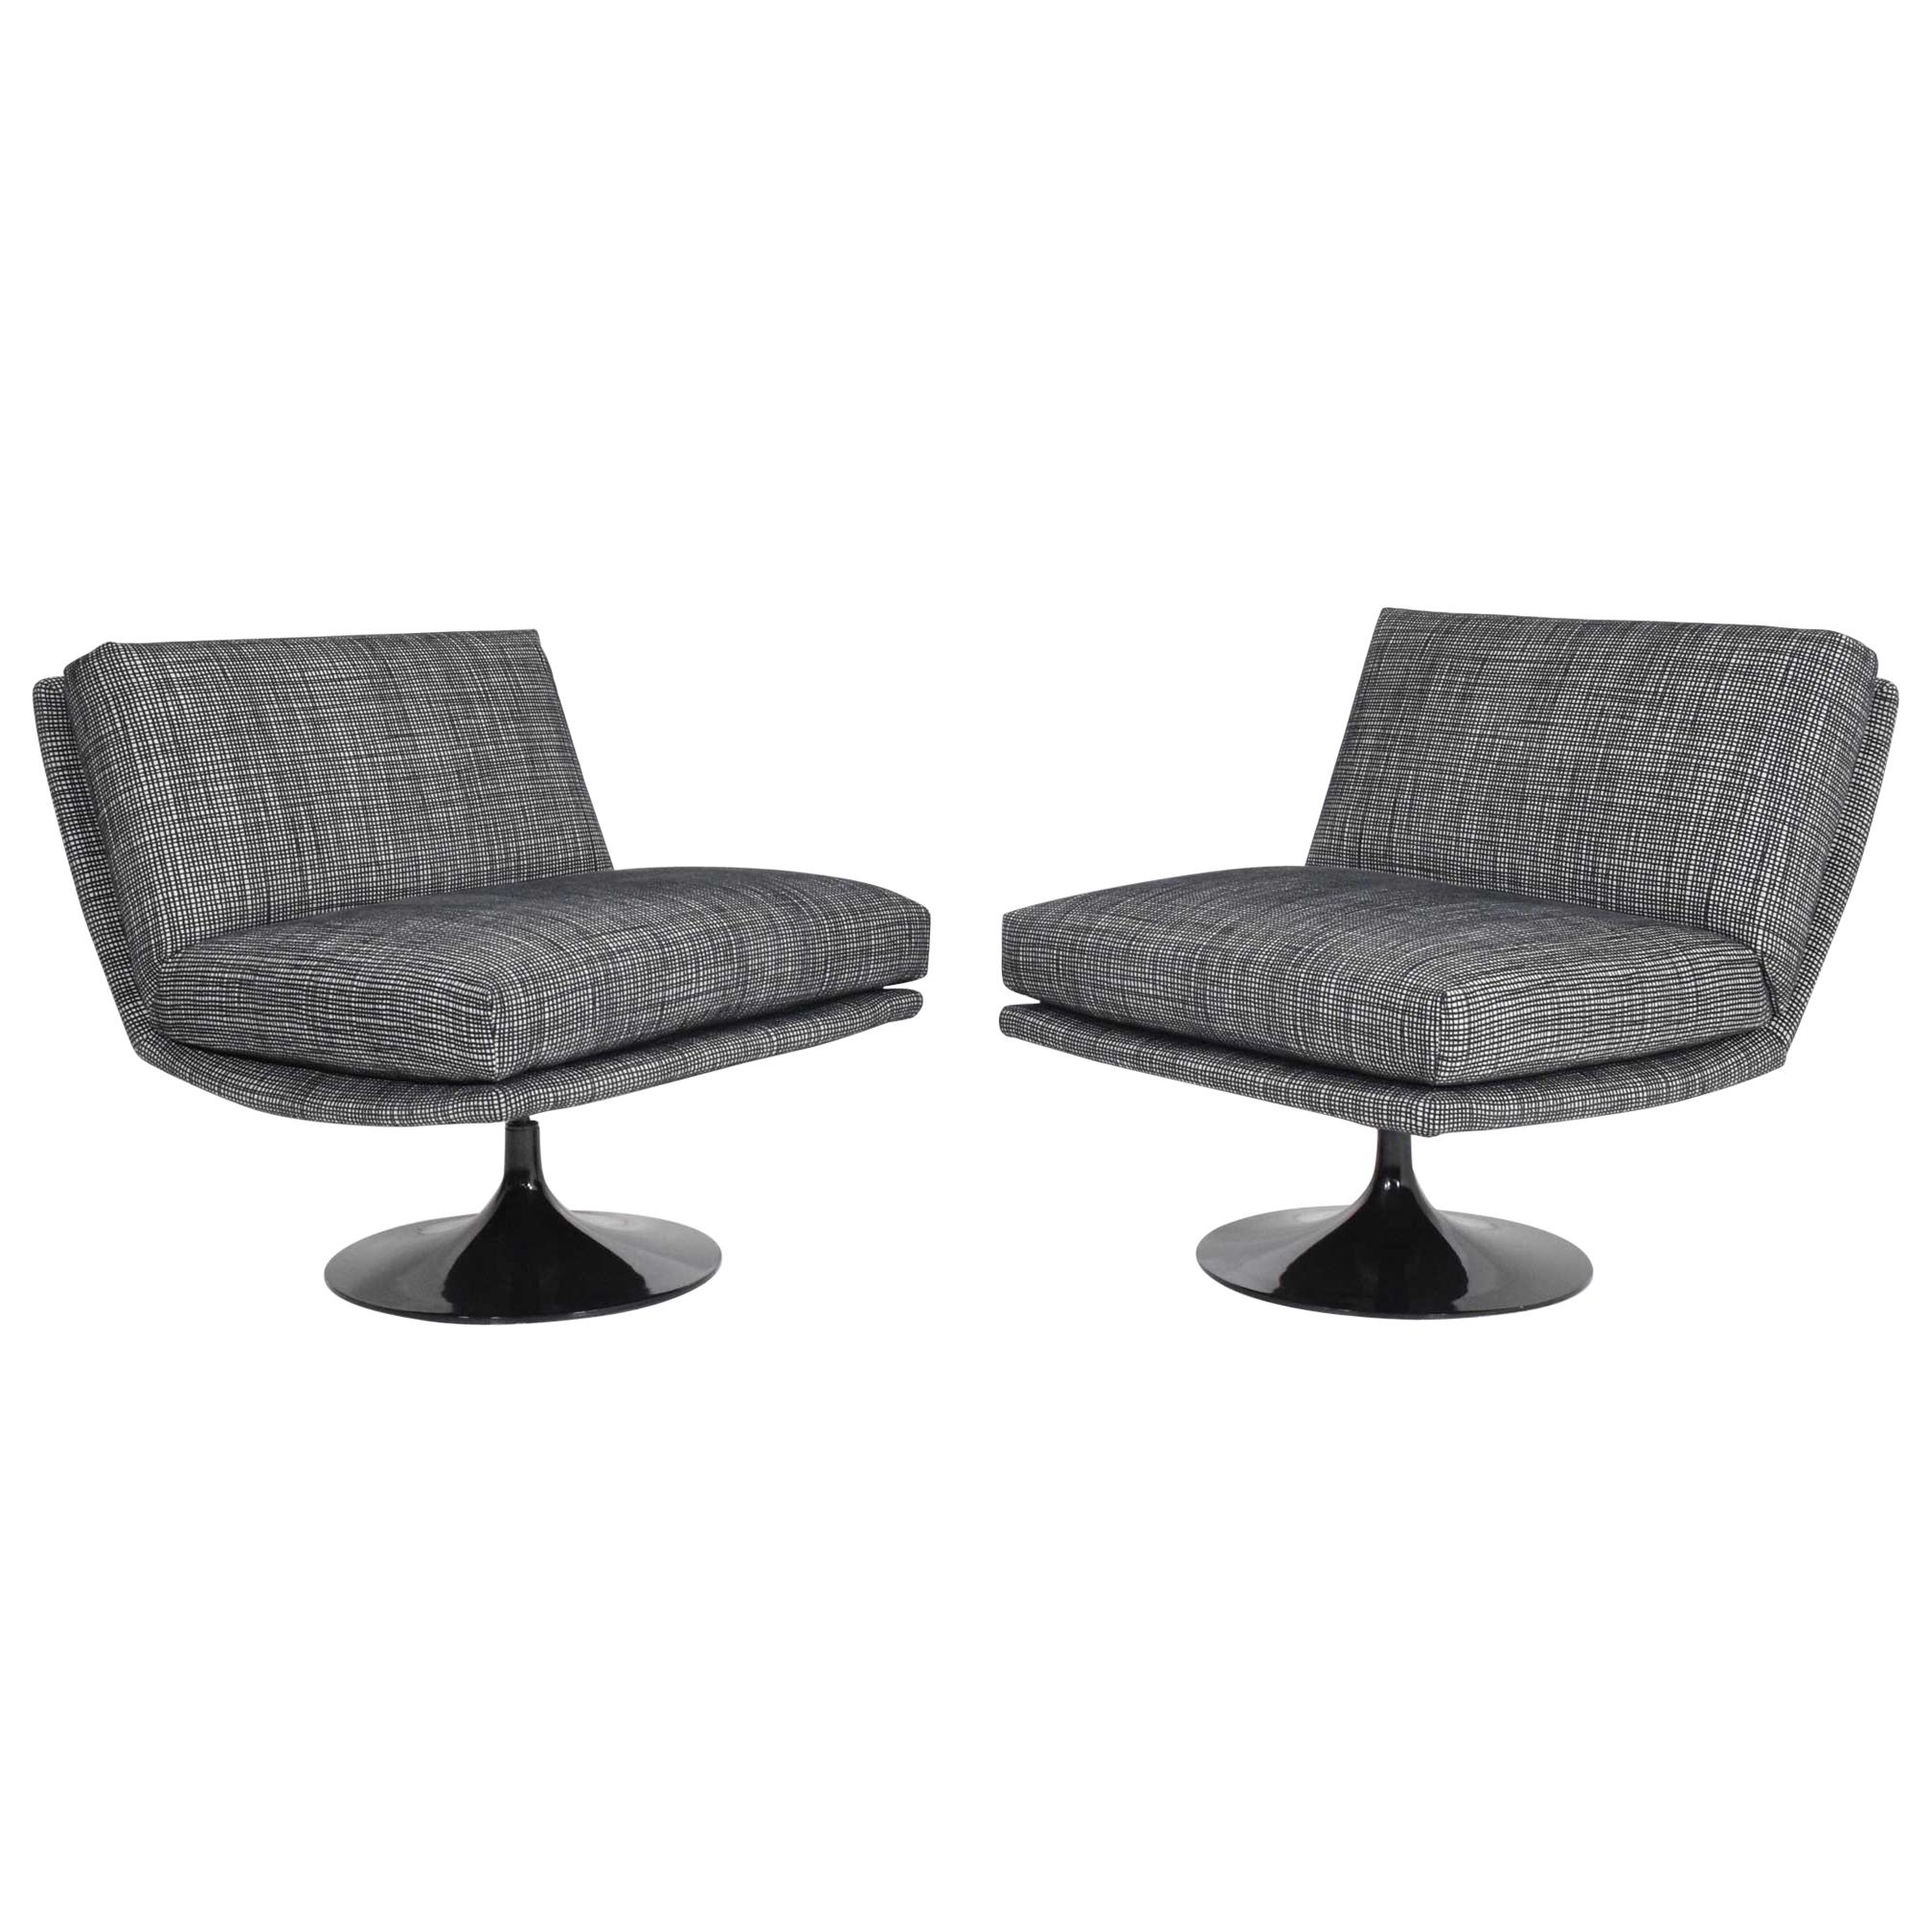 Adrian Pearsall for Craft Associates Swivel Lounge Chairs